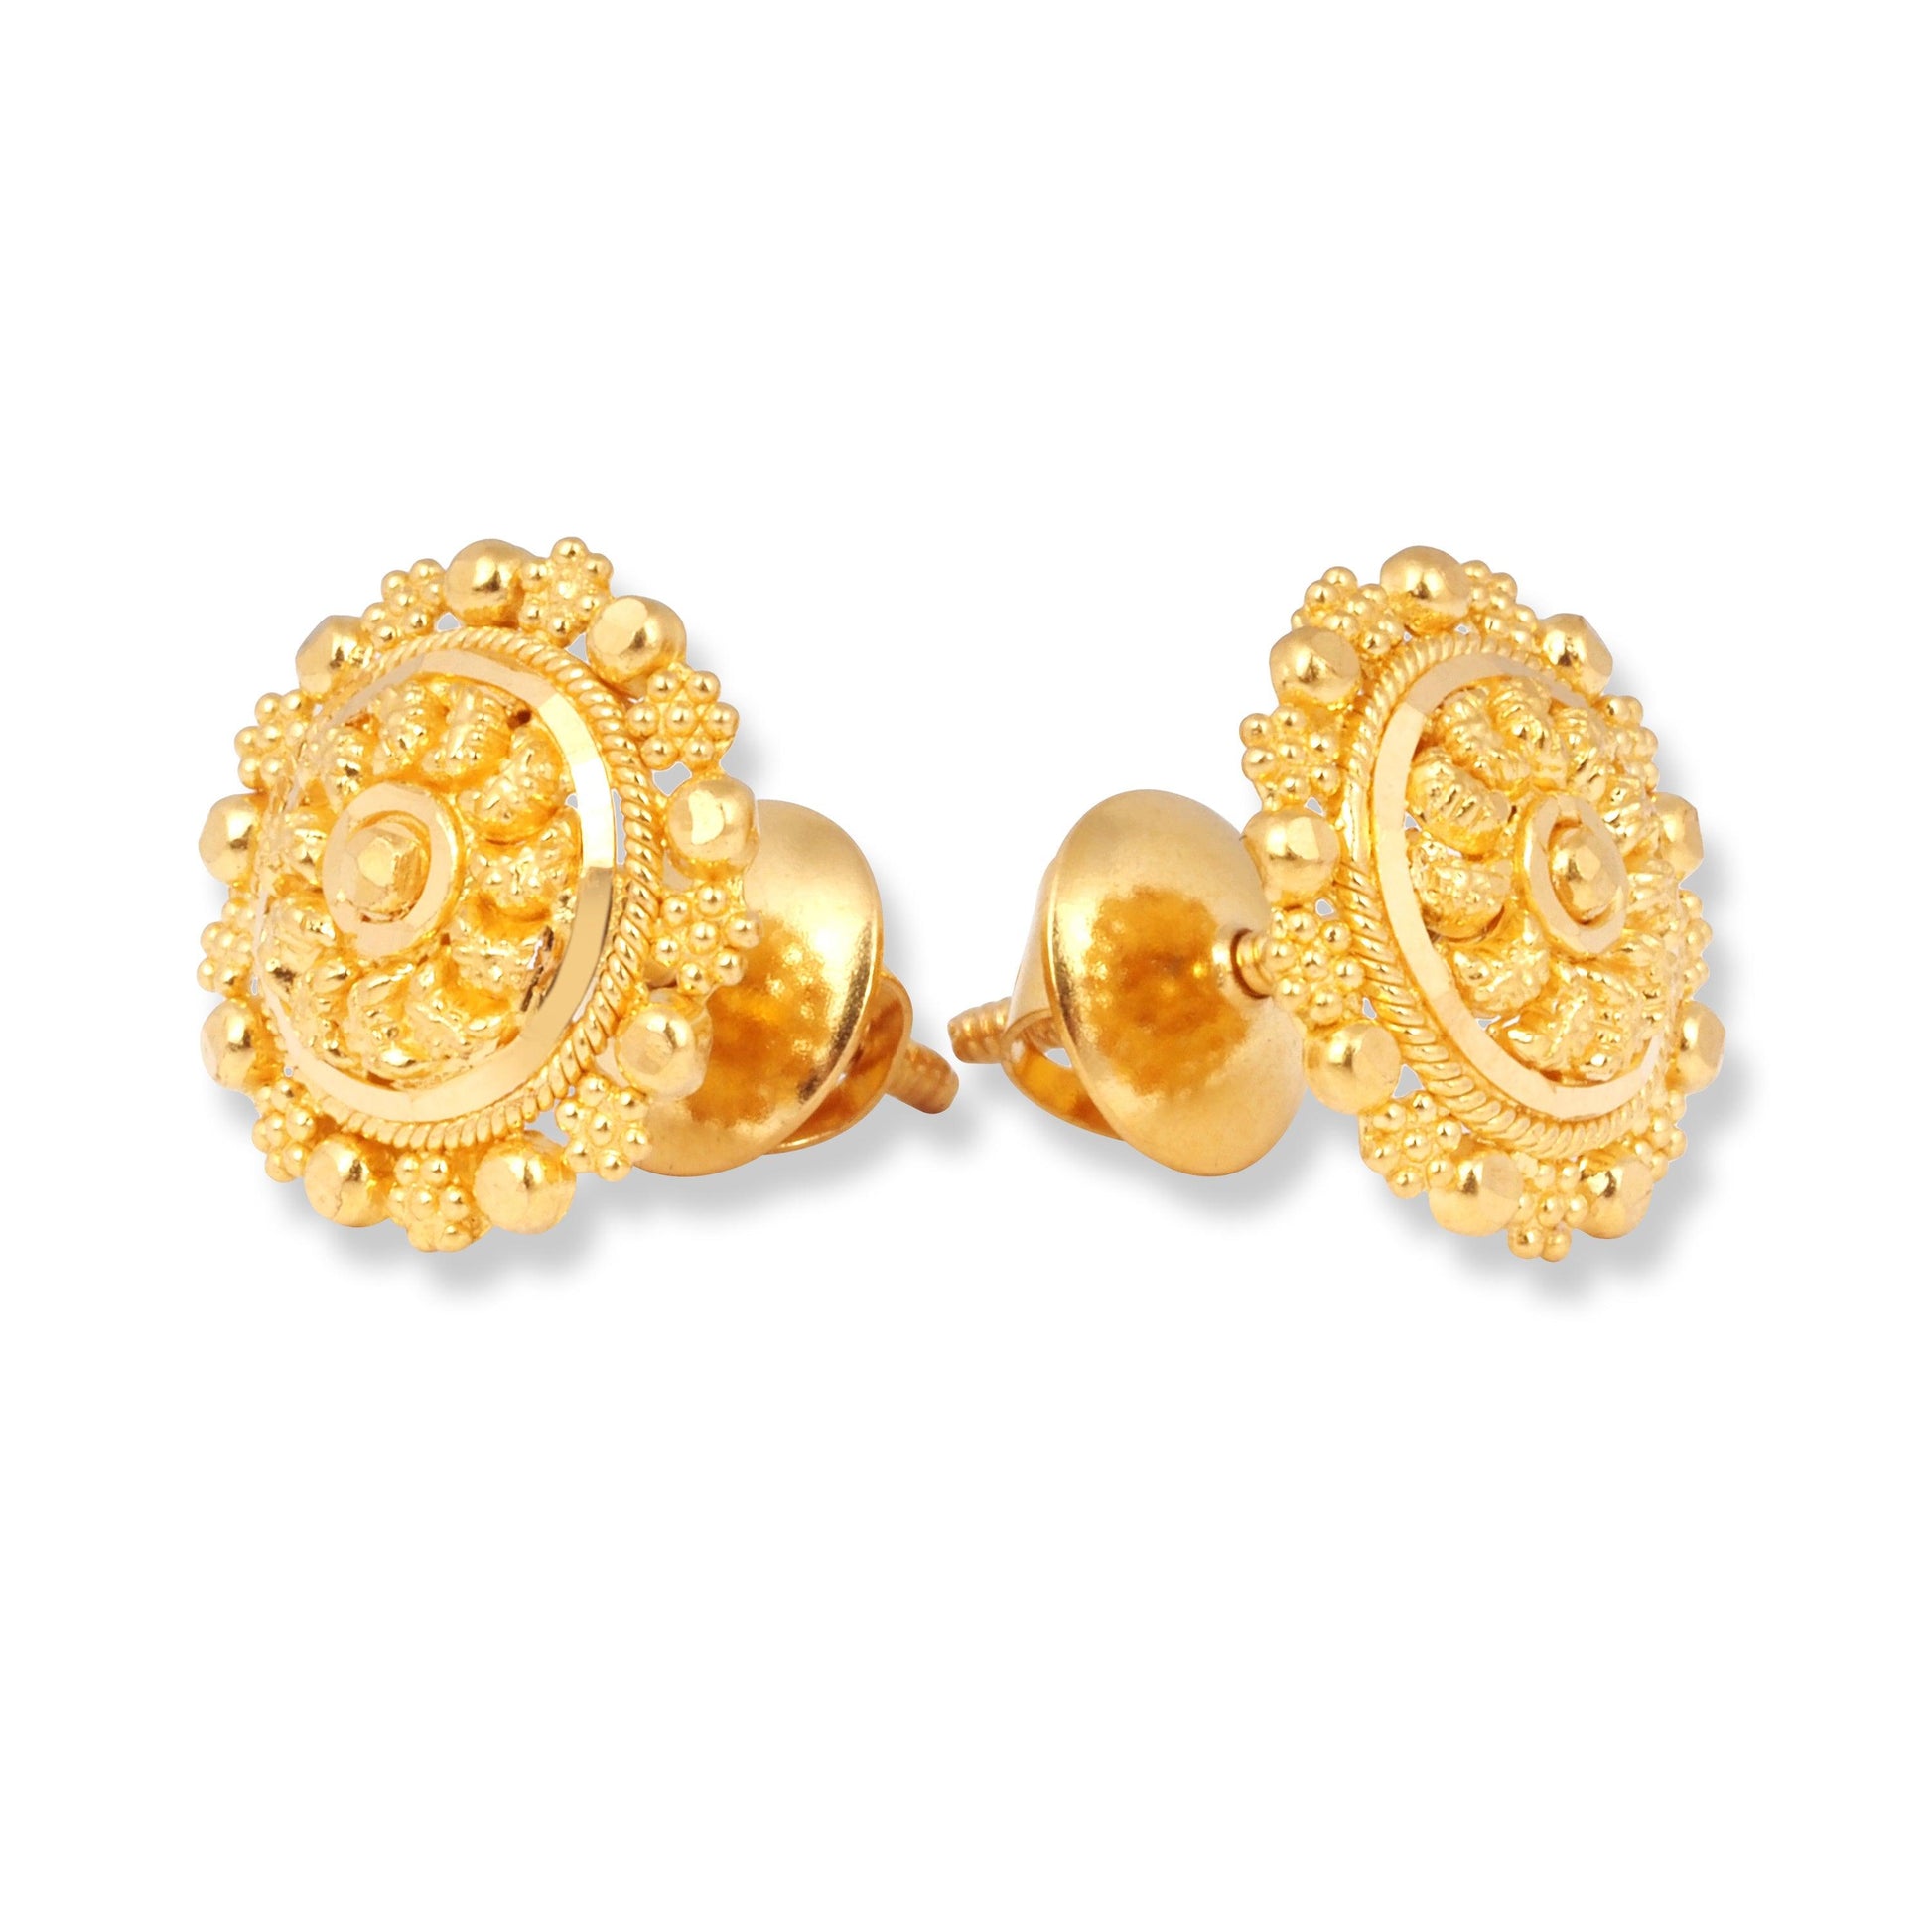 22ct Gold Earrings with Filigree Design (3.4g) E-7885 - Minar Jewellers